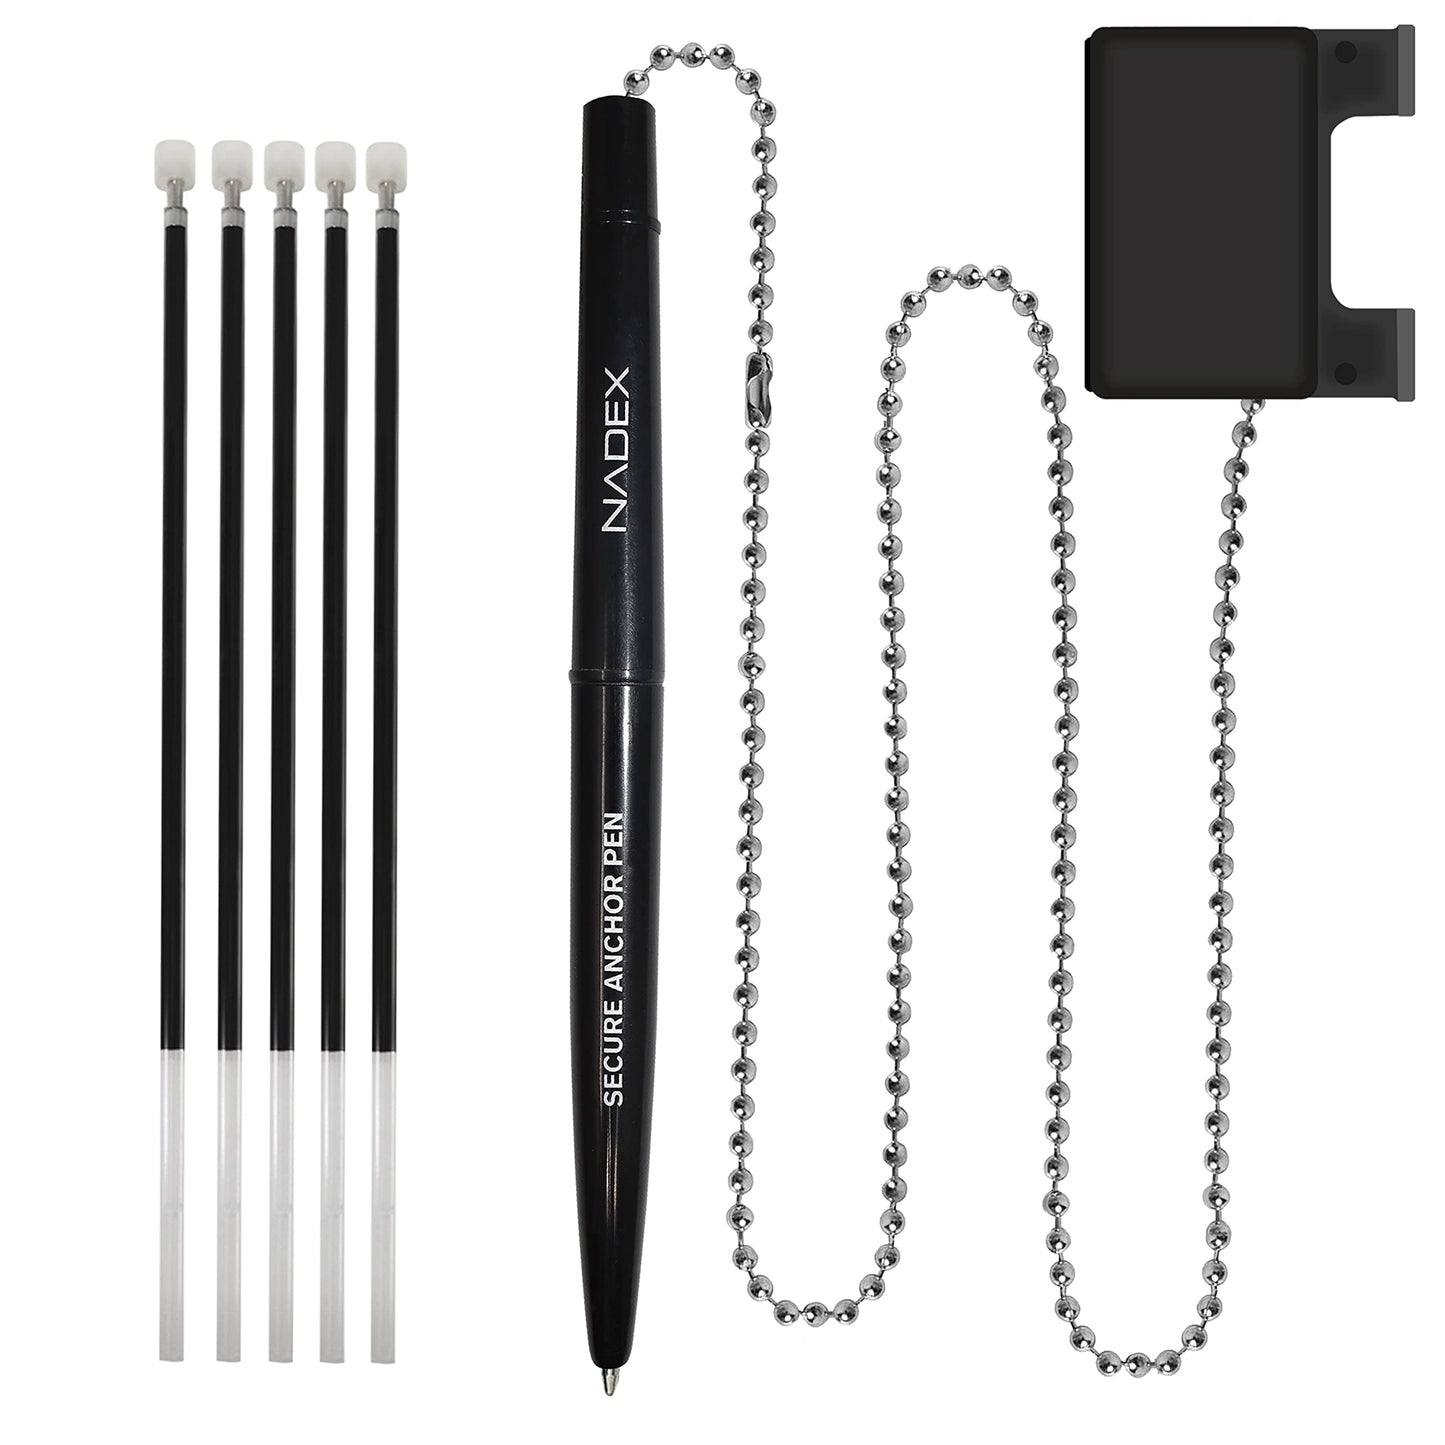 Ball and Chain Security Pen Set | 1 Pen, 1 Adhesive Mount, and 5 Refills (Black)